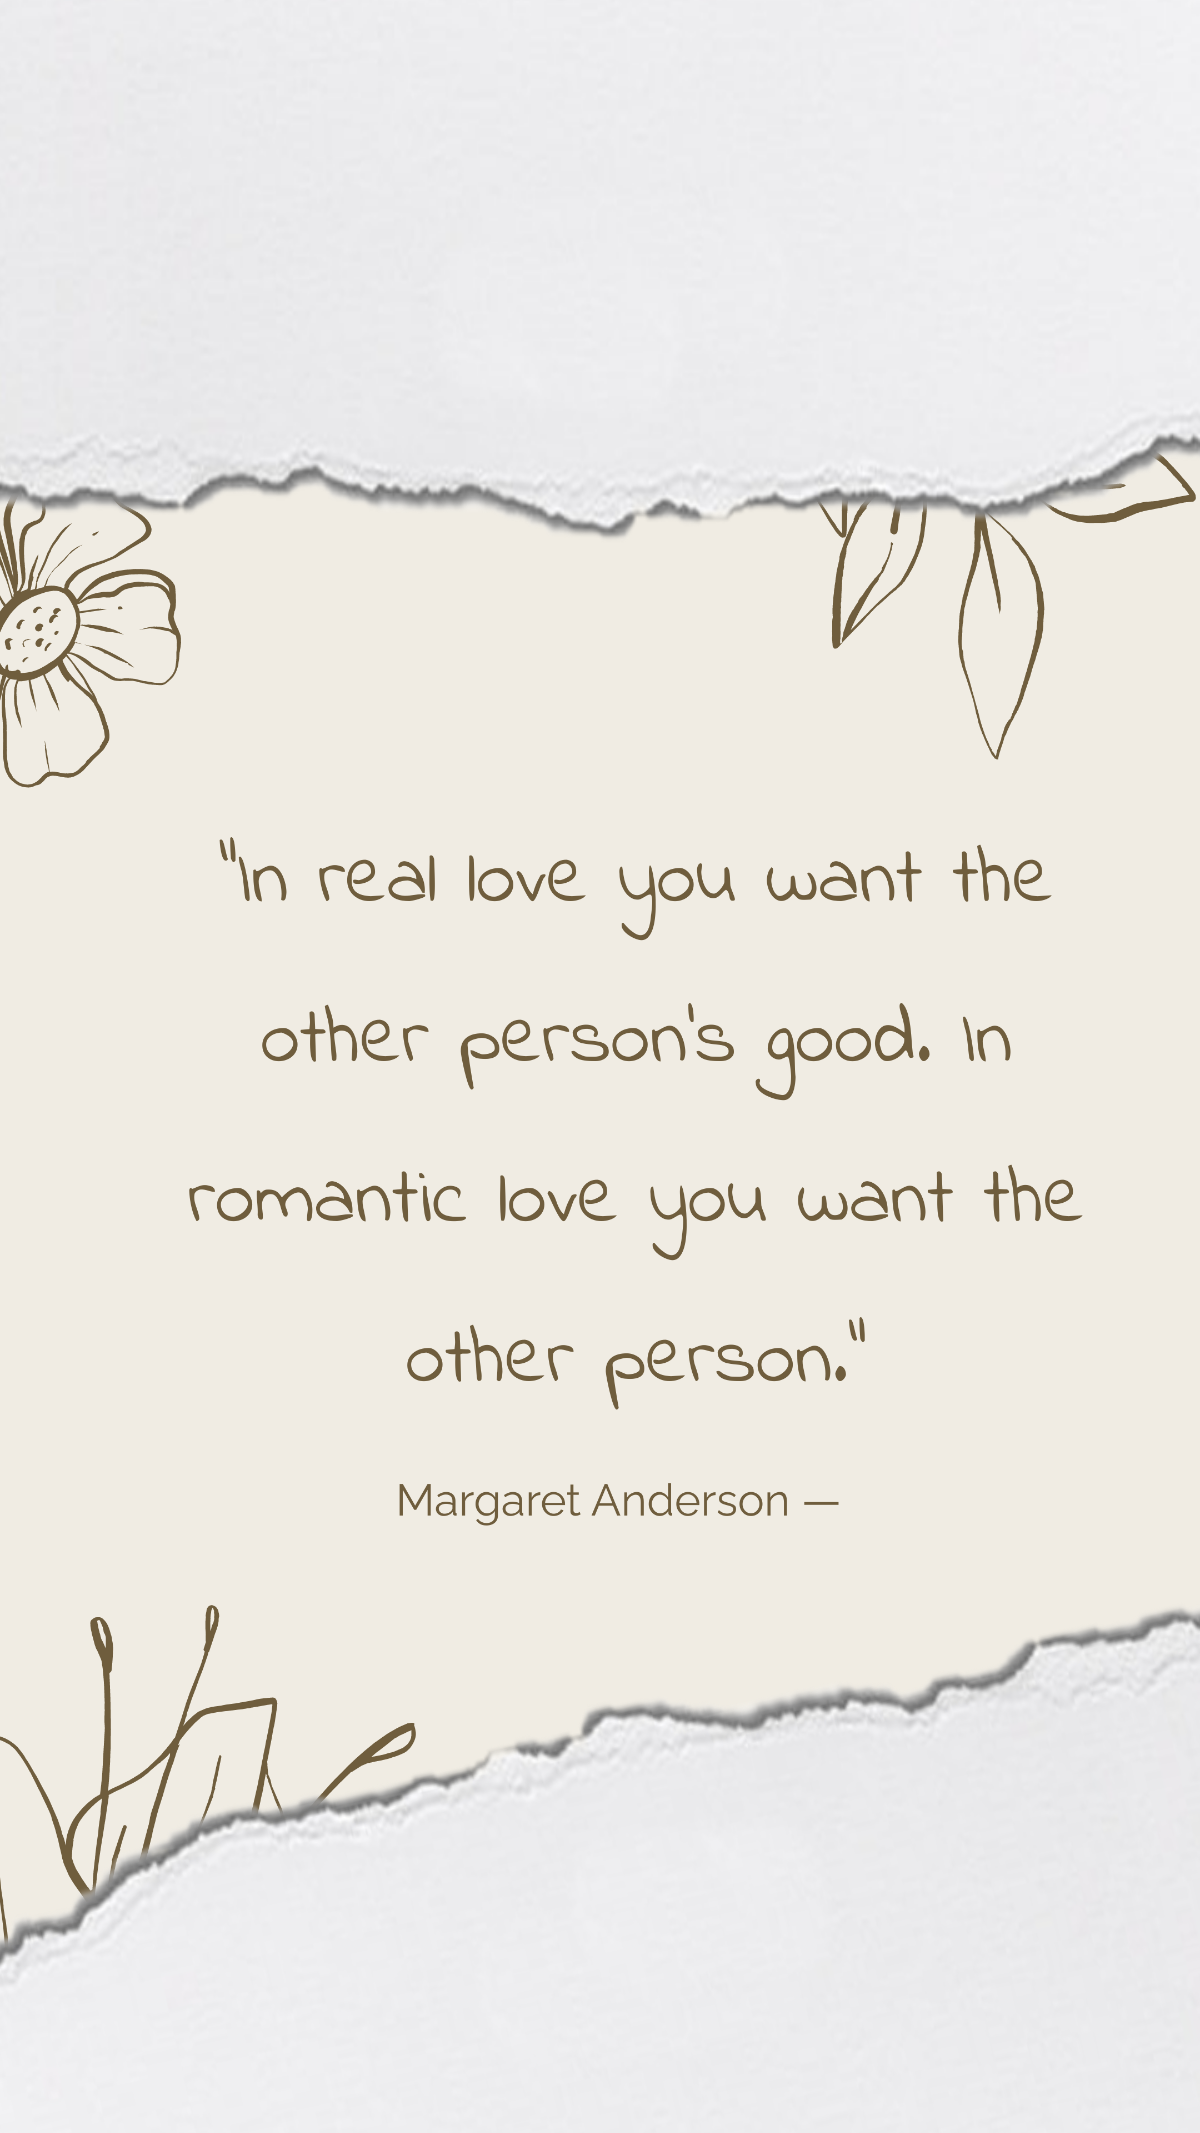 Margaret Anderson — “In real love you want the other person’s good. In romantic love you want the other person.” Template